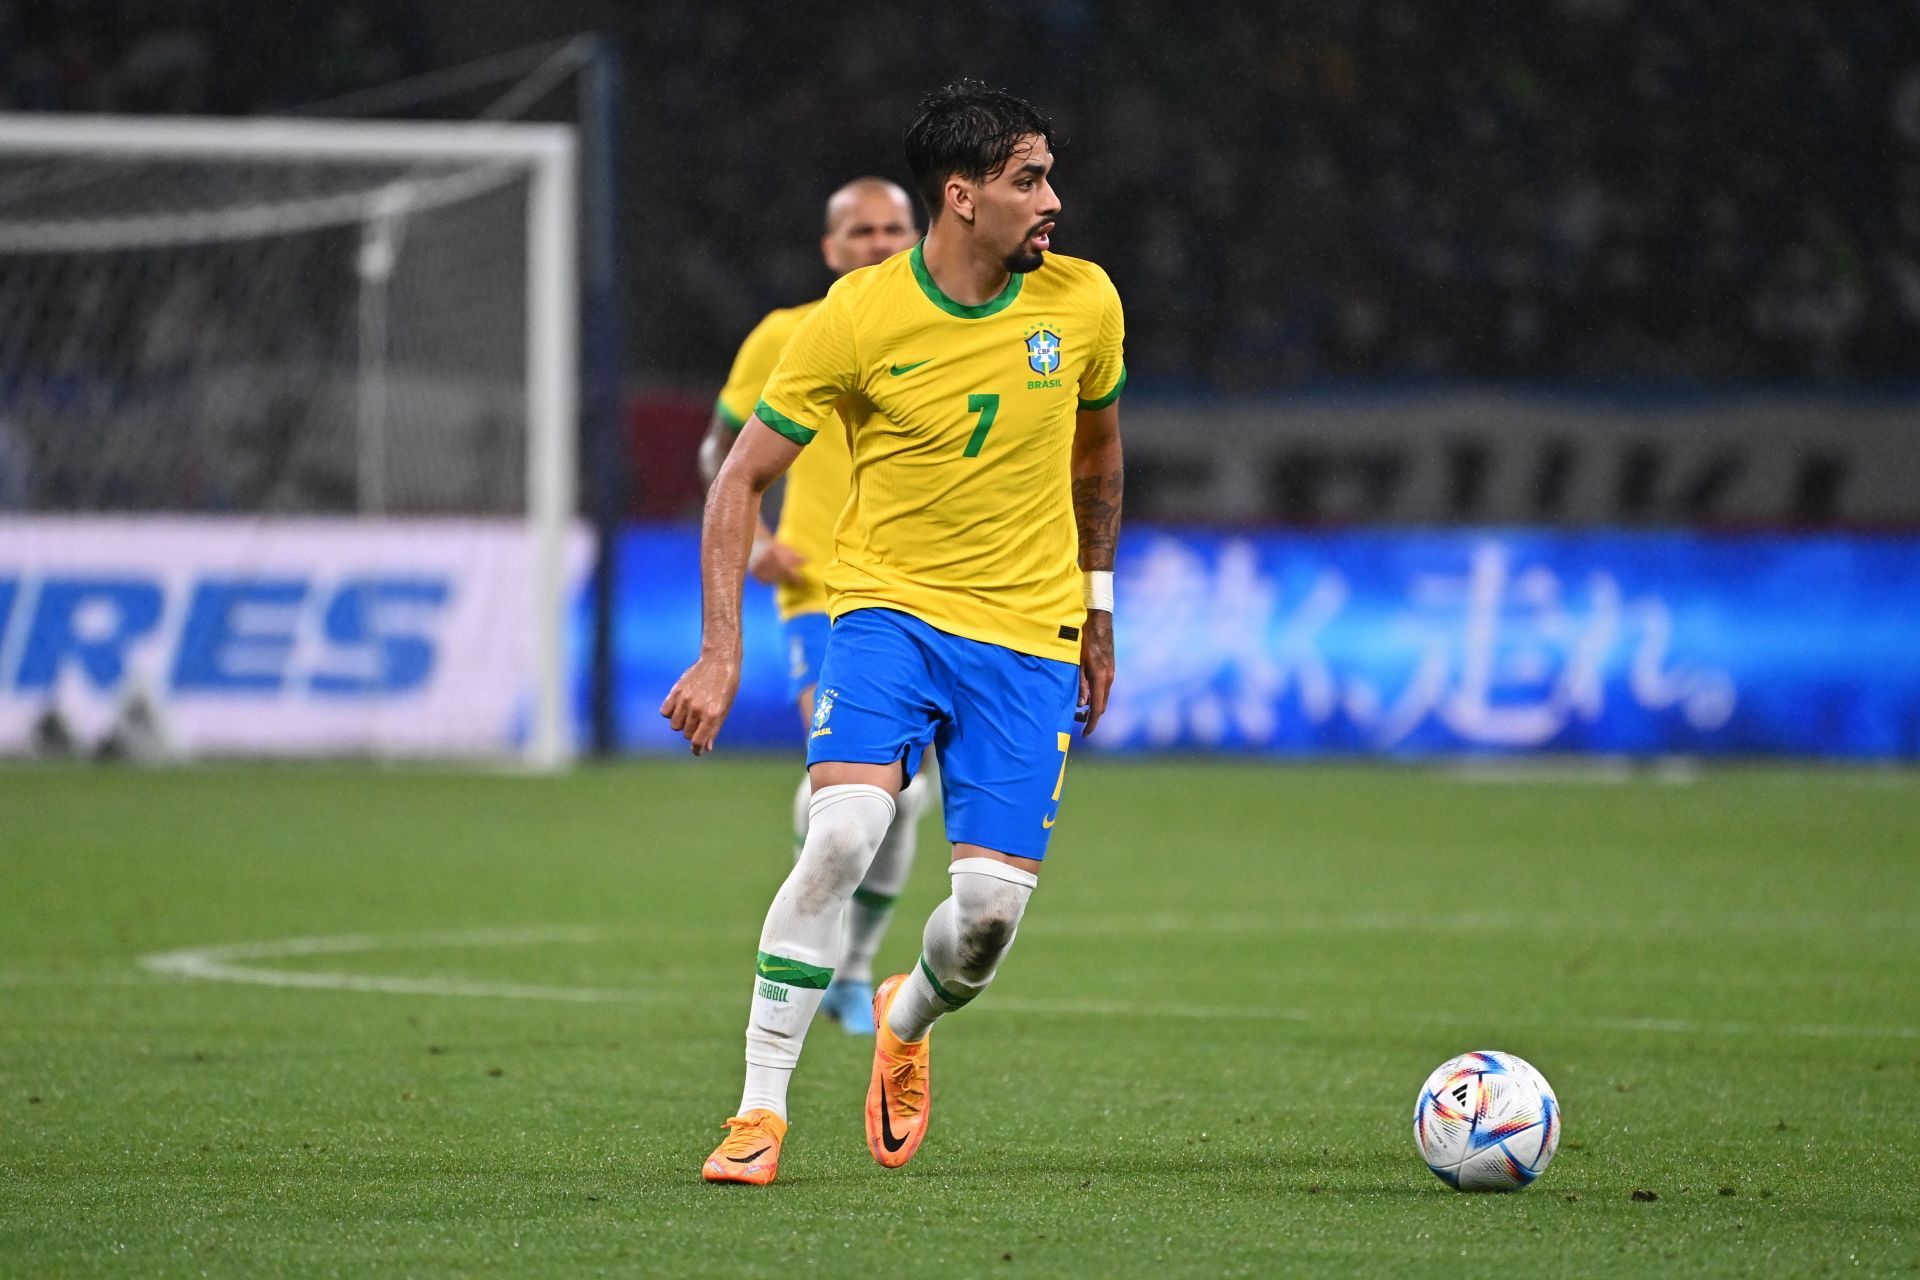 Lucas Paqueta could be on his way to West Ham United.